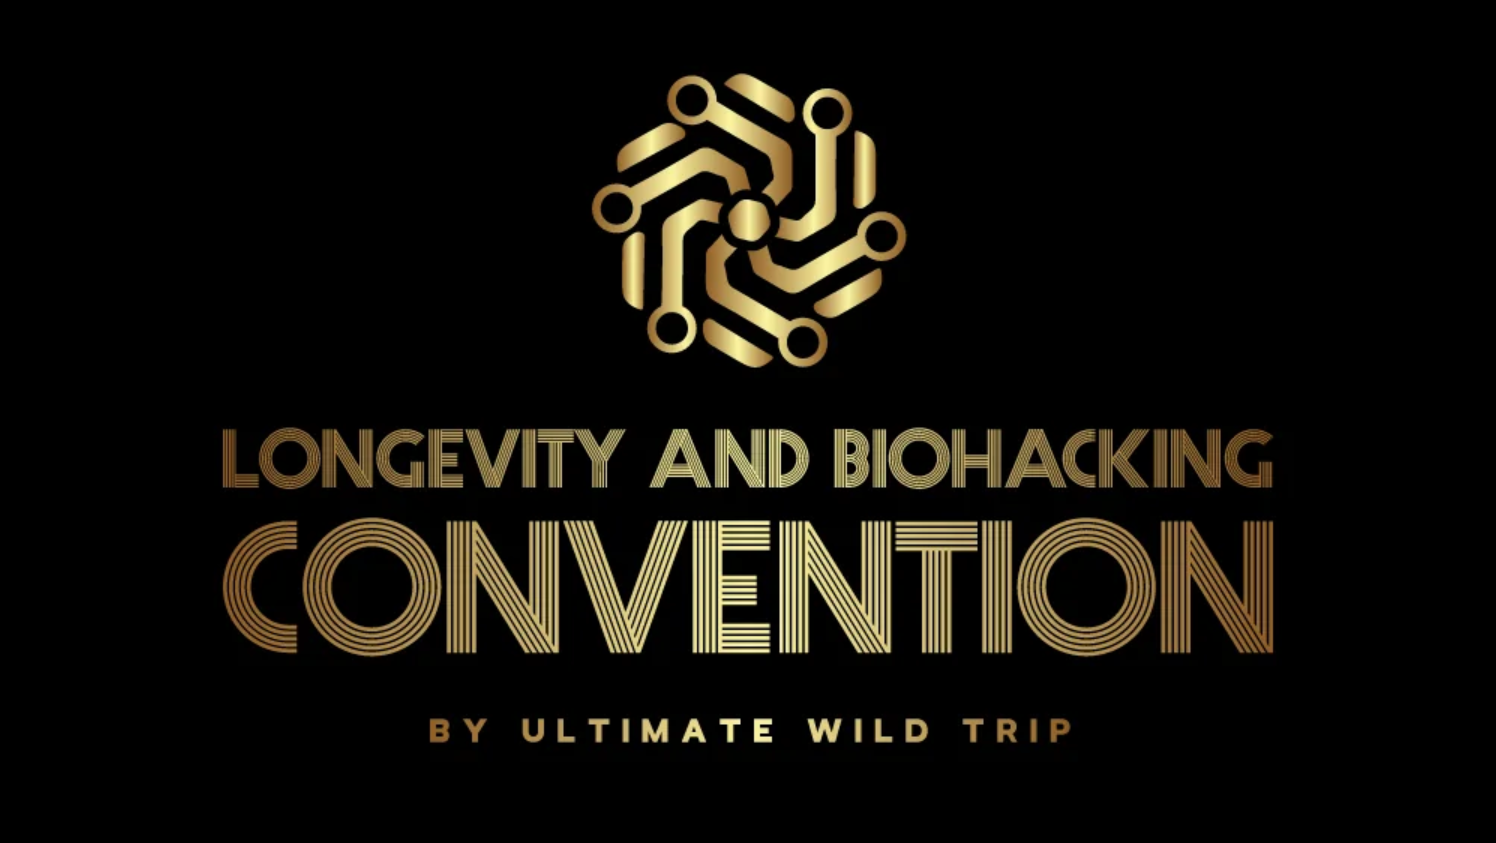 Longevity and biohacking convention Cancun